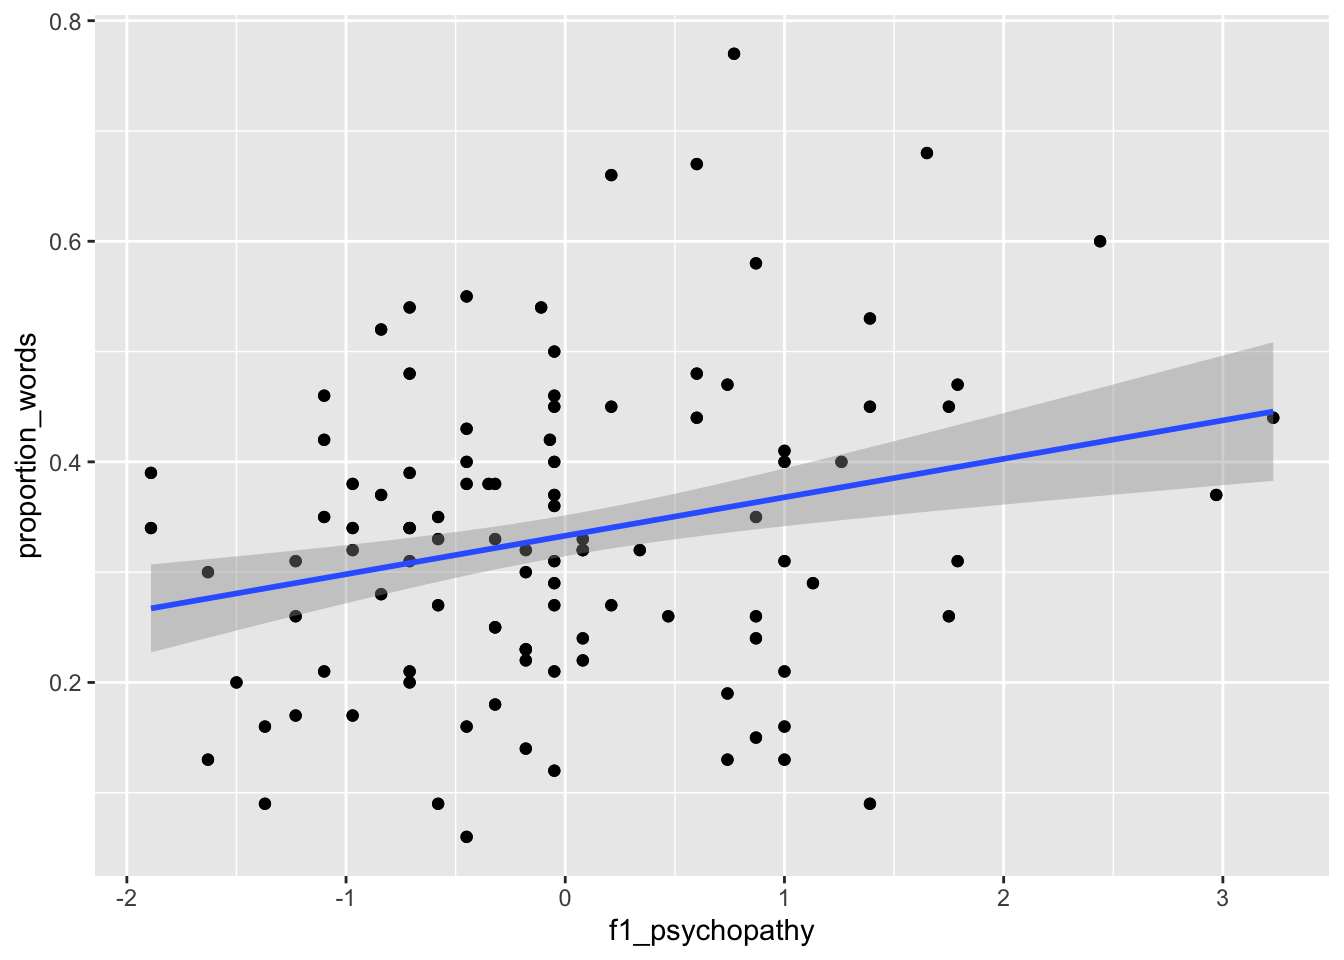 Proportion of words spoken modeled on psychopathy (left) and interruptions per minute (right).